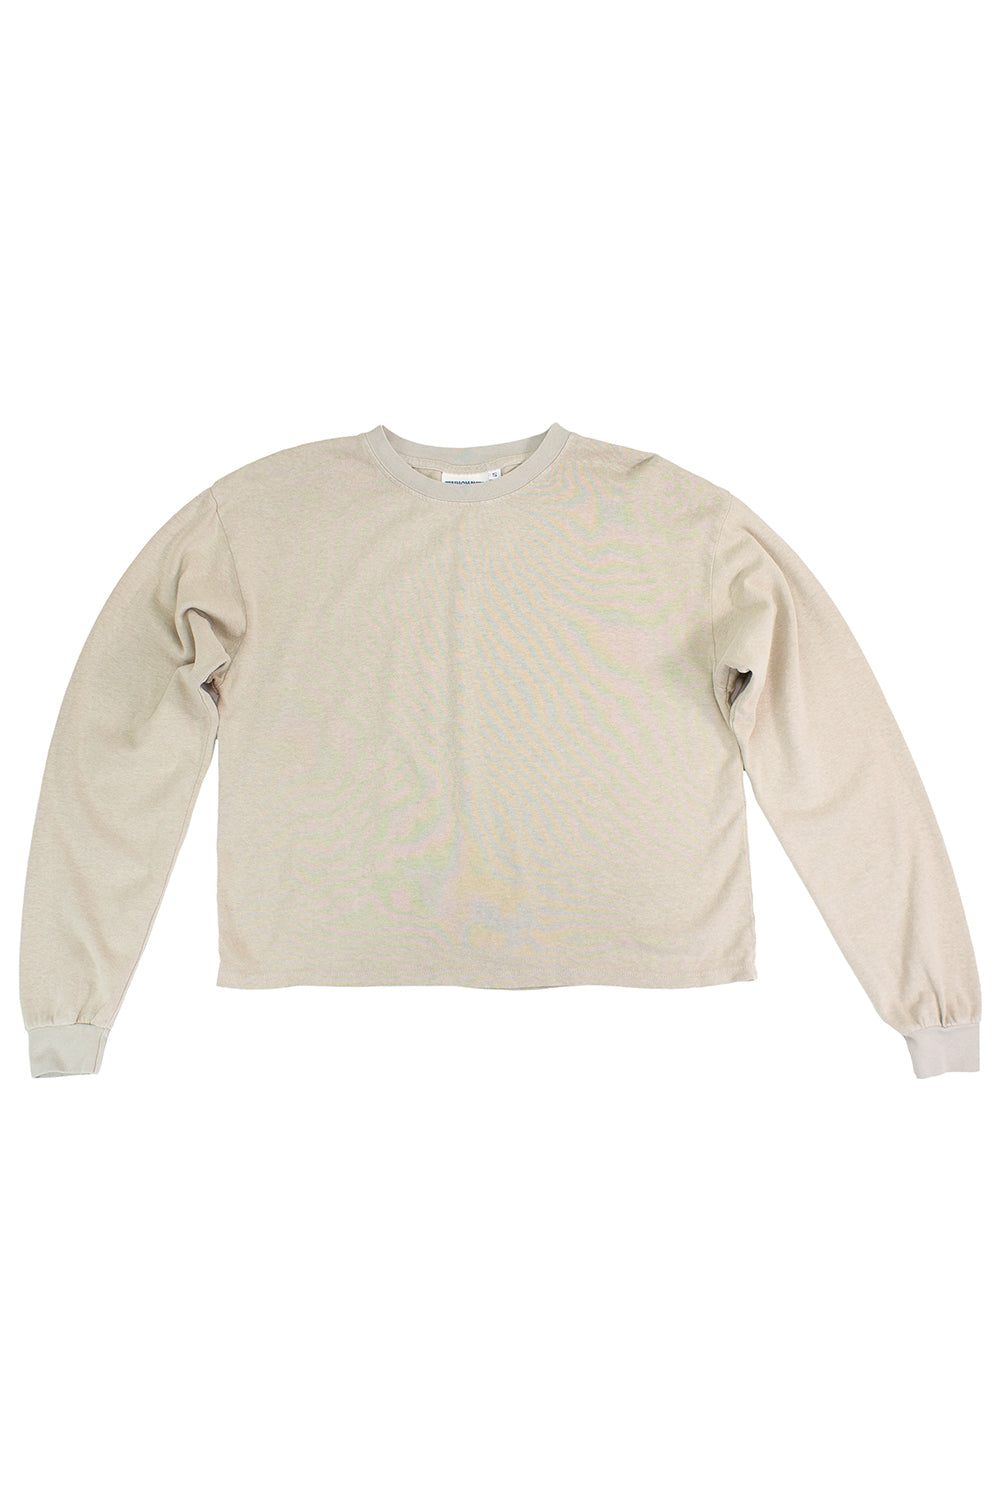 Cropped Long Sleeve Tee | Jungmaven Hemp Clothing & Accessories / Color: Canvas